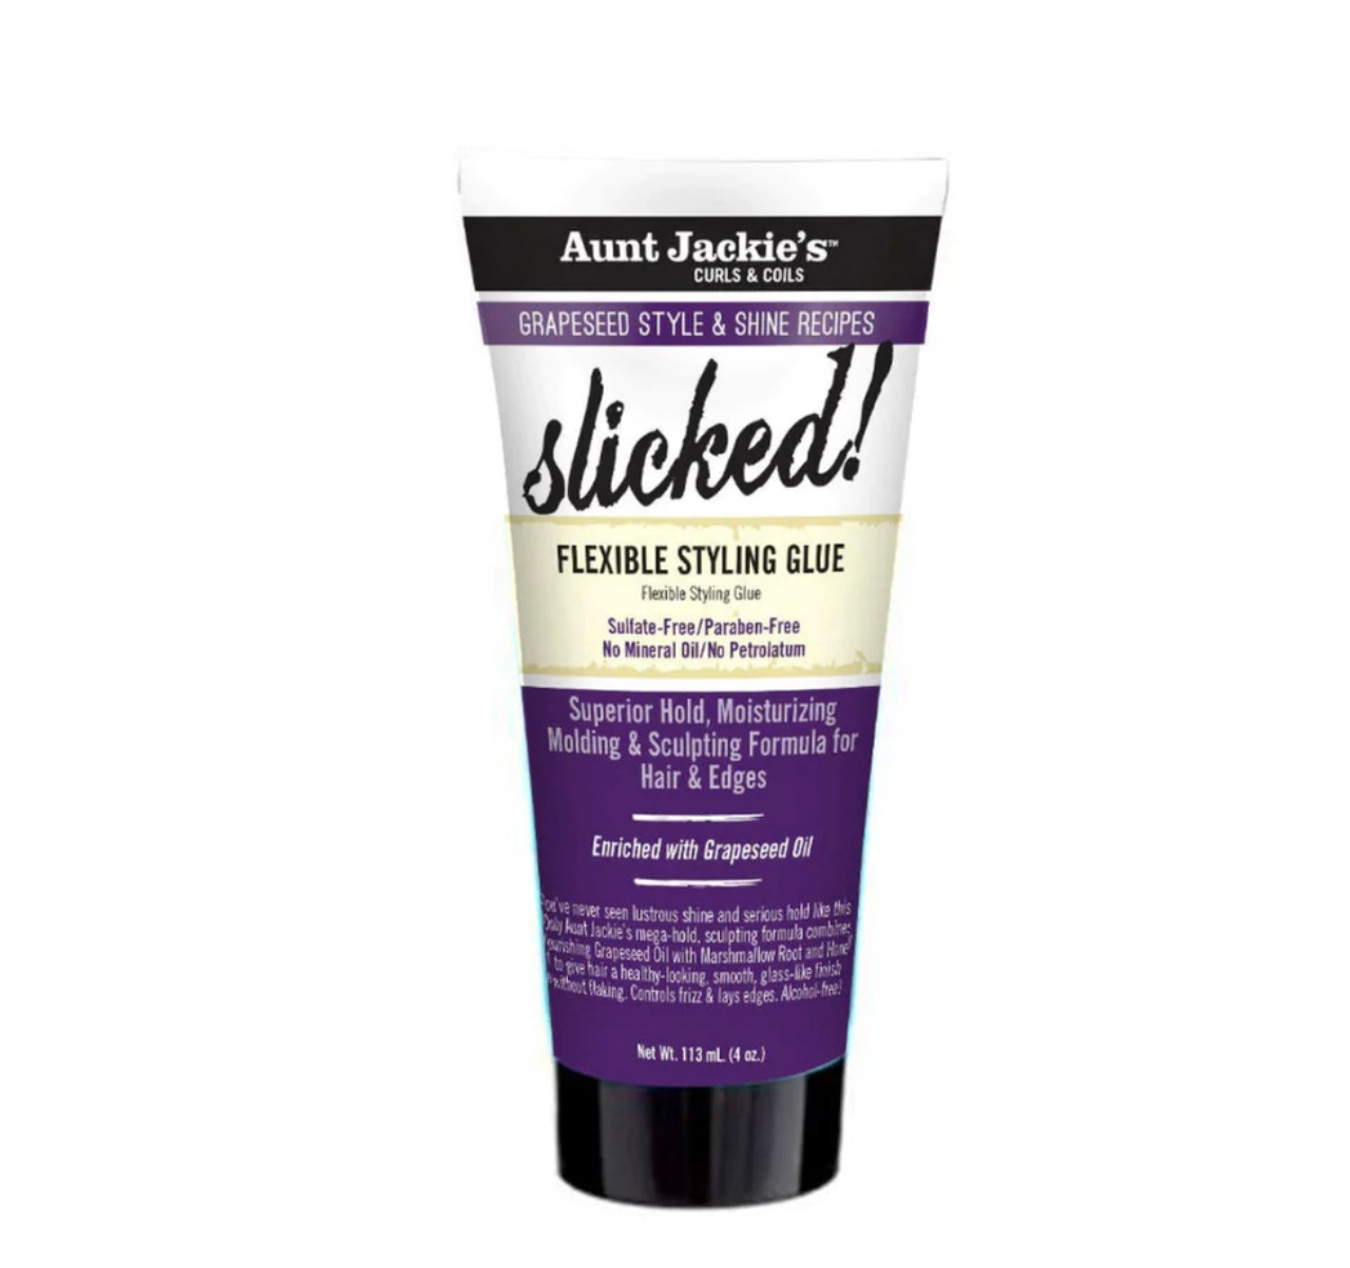 Aunt Jackie's Grapeseed Slicked Flexible Styling Glue